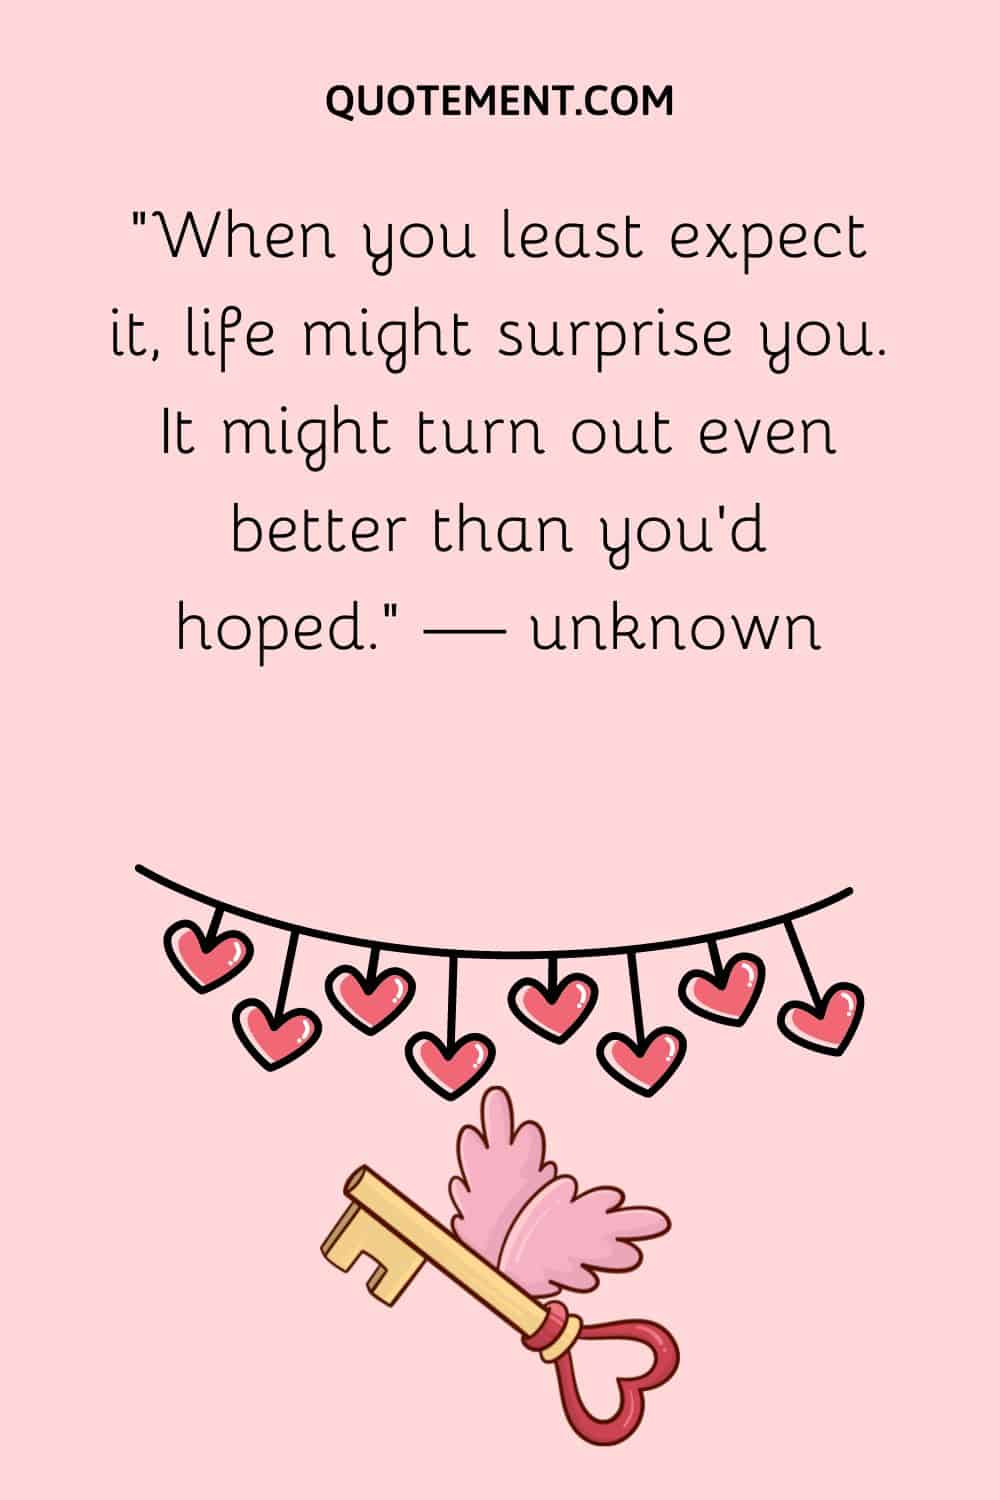 “When you least expect it, life might surprise you. It might turn out even better than you’d hoped.” — unknown